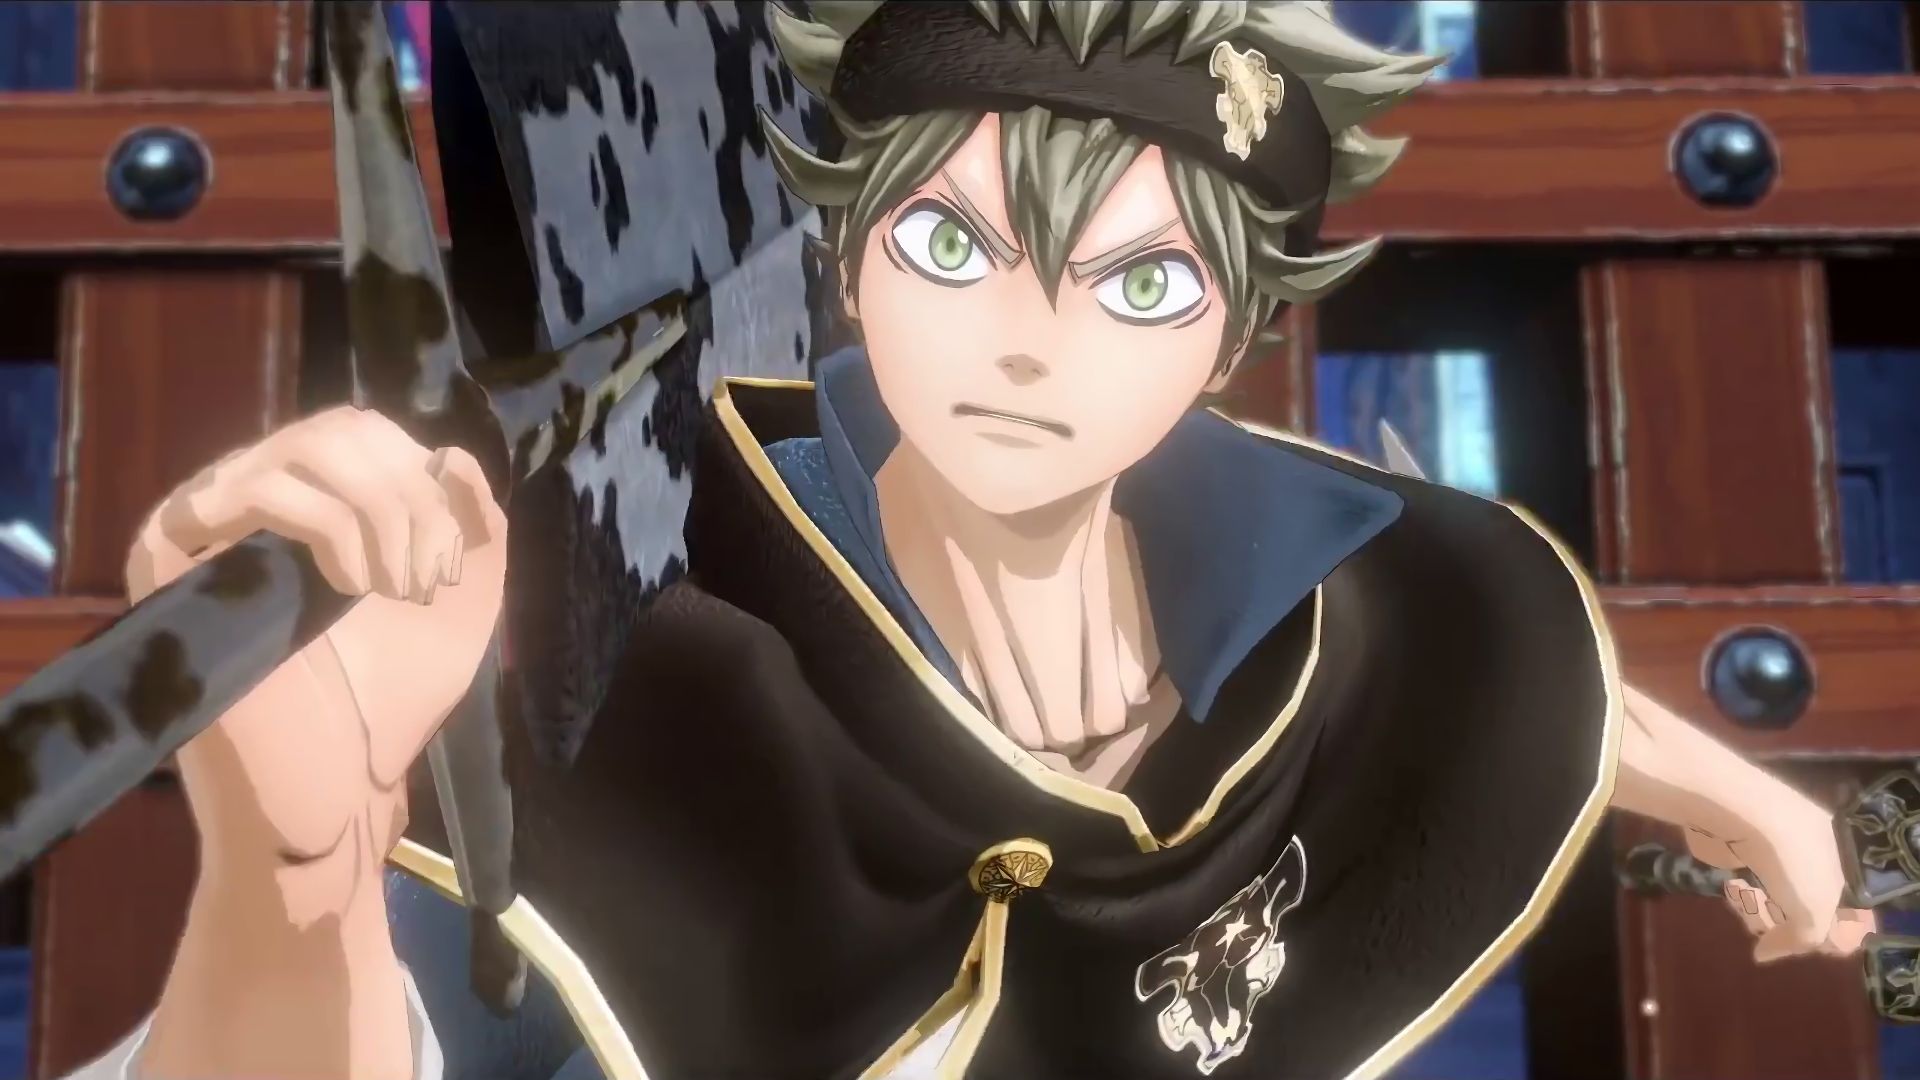 Asta From The Anime Black Clover 1920 1080